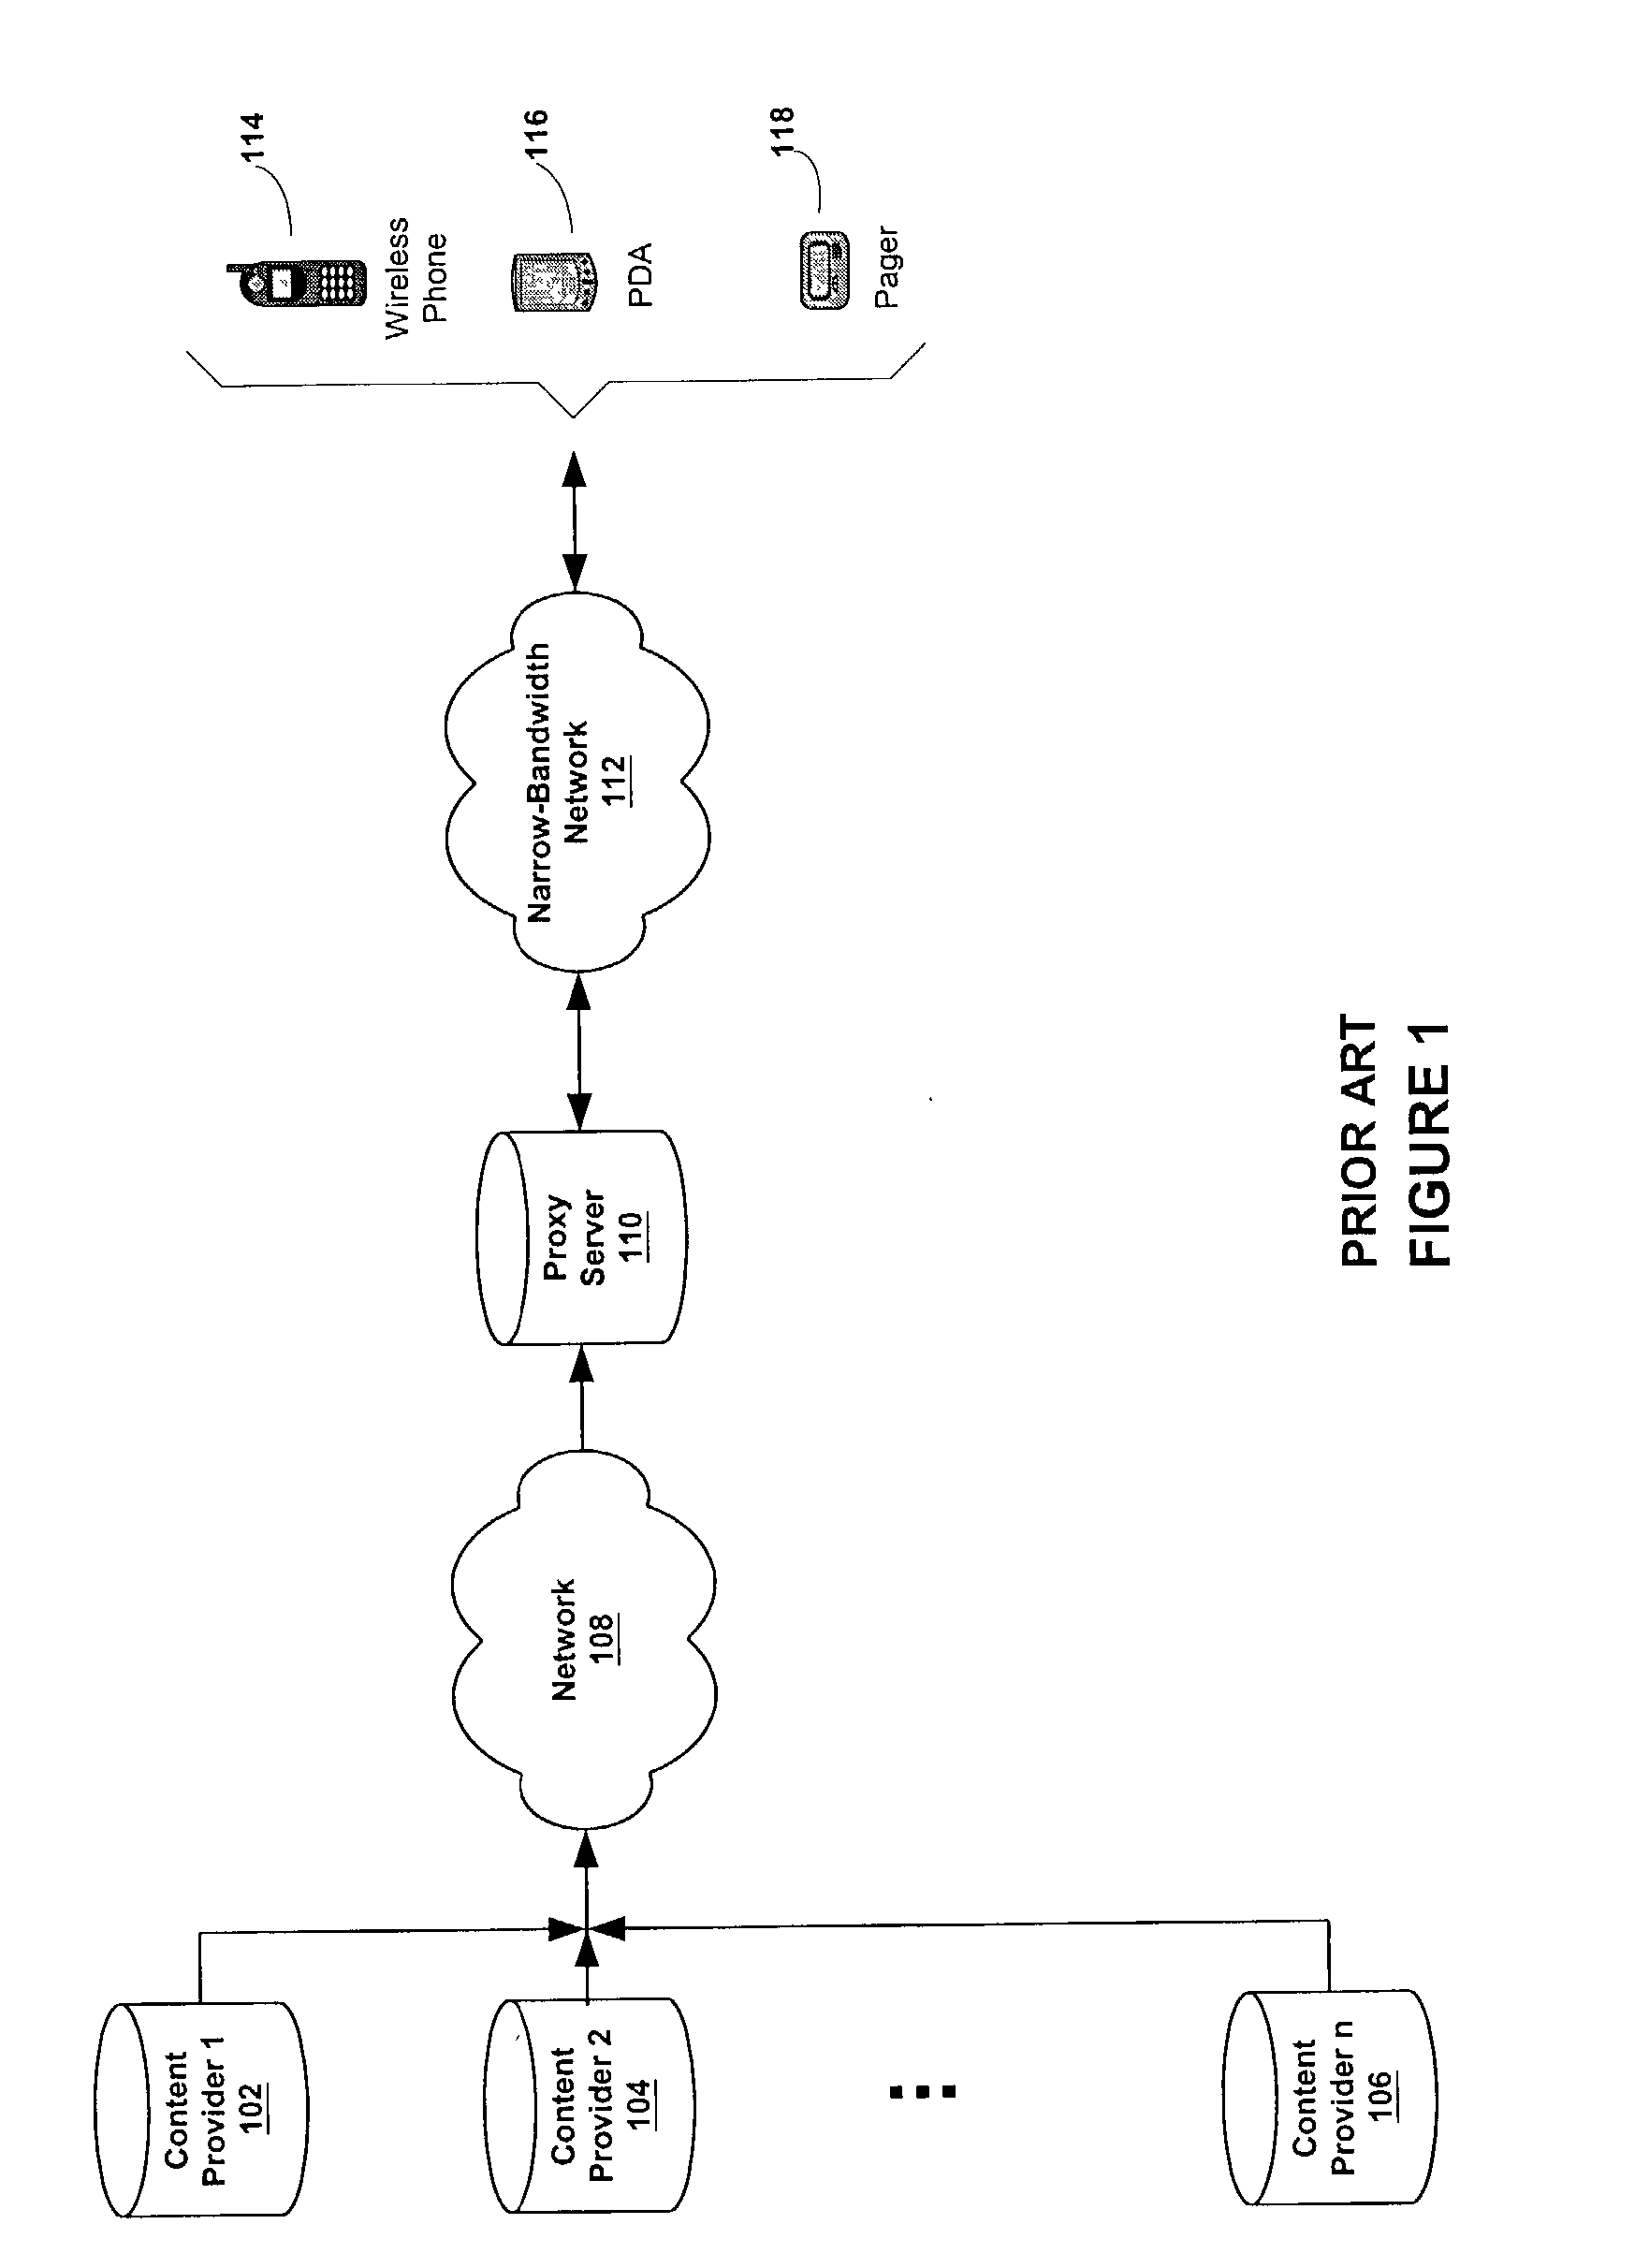 Information filling station facilitating wireless transfer of data content to a portable device or other pre-defined locations